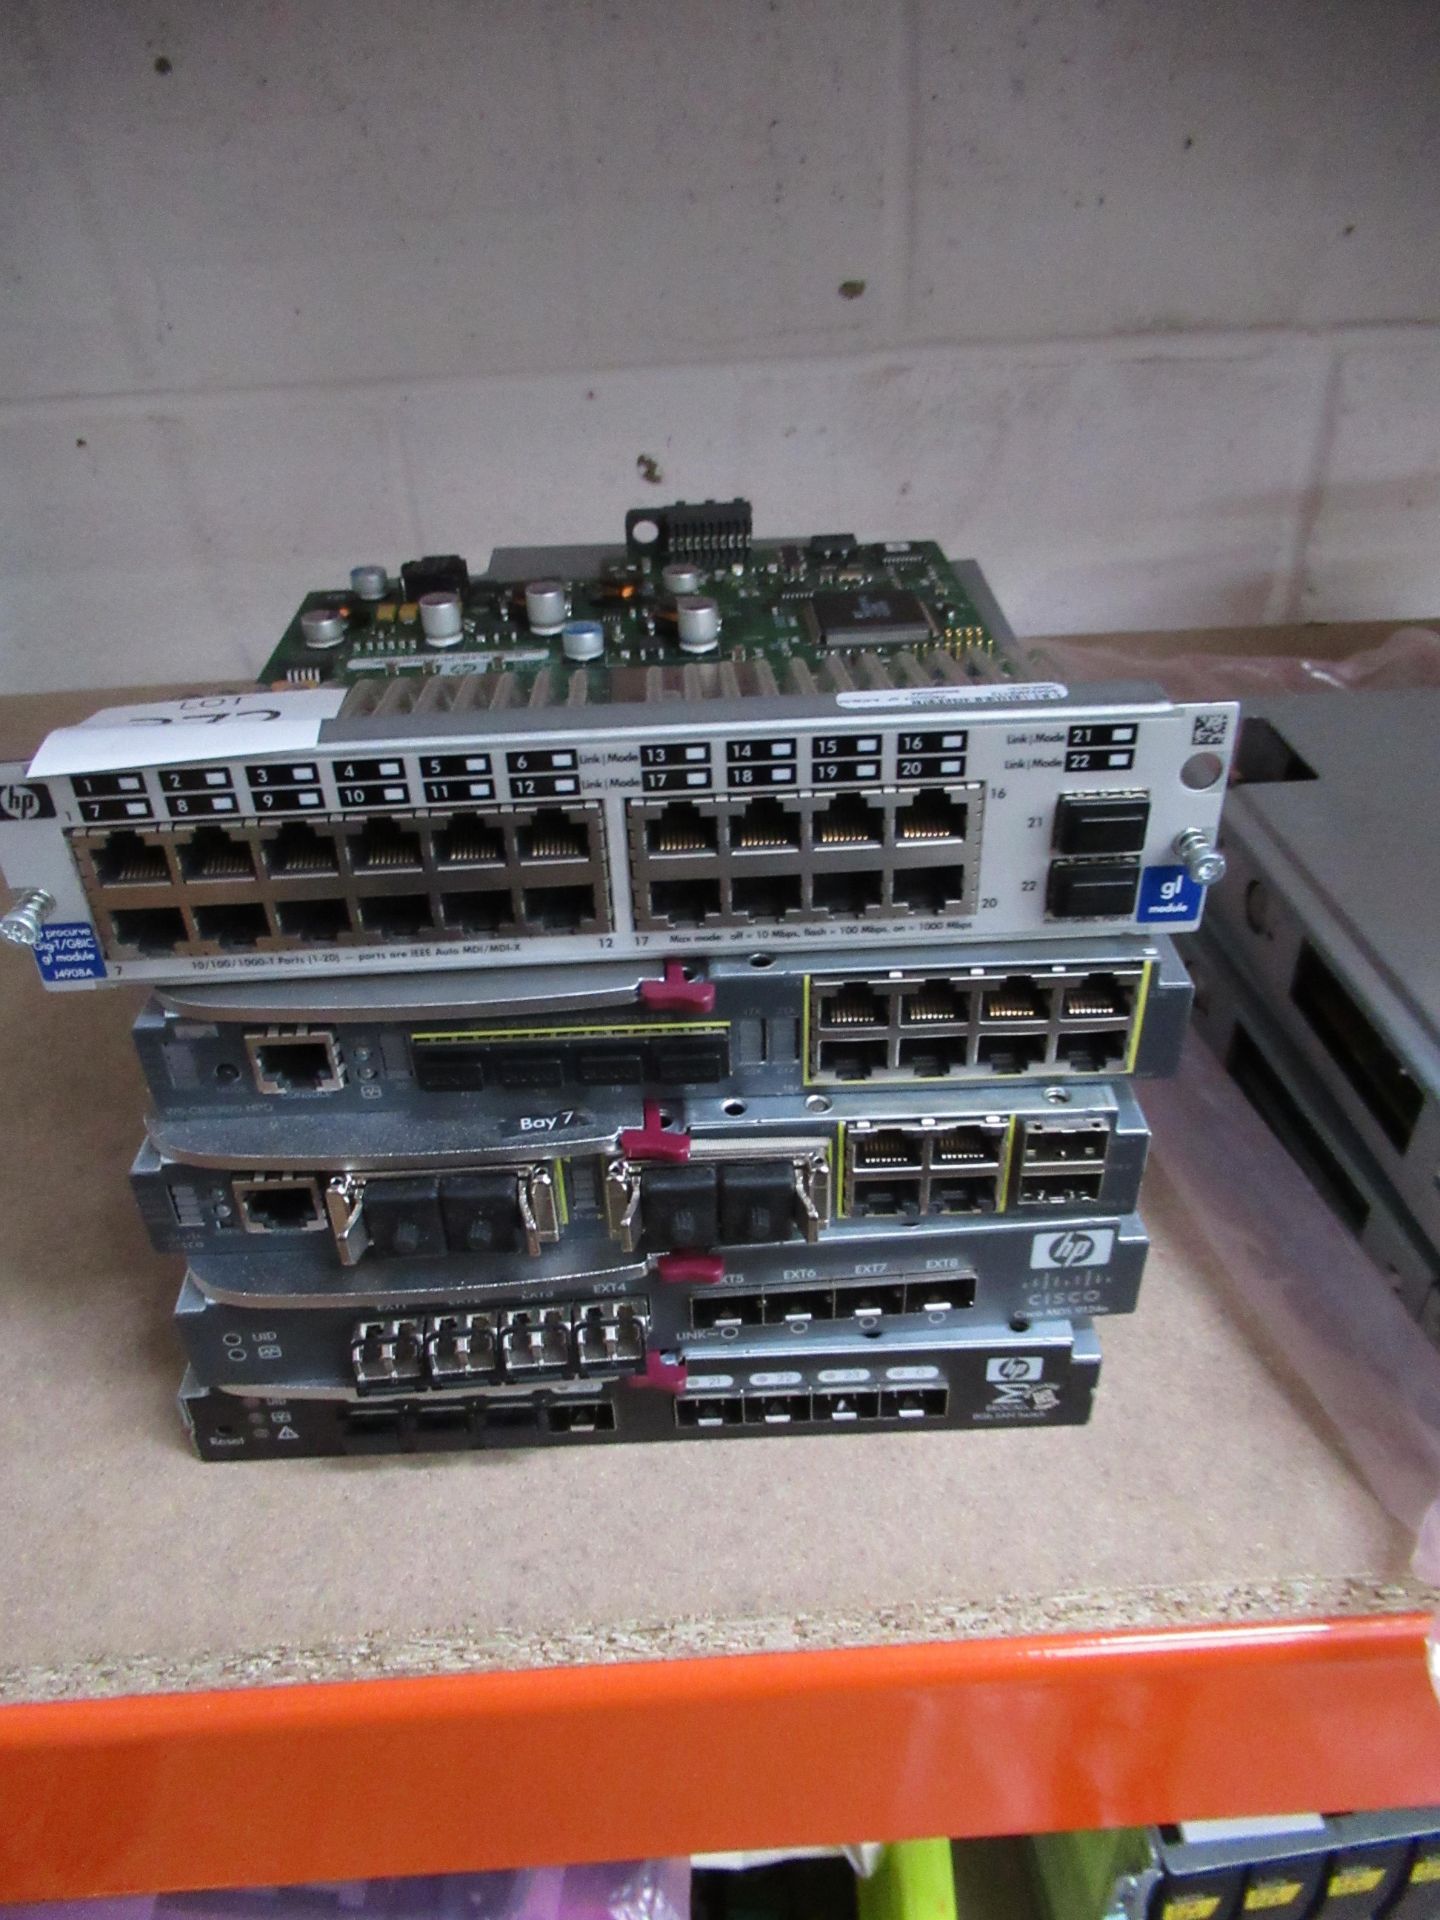 1 x AMS old style controller 4g DIMM, 8G Fibre channel interface, Control unit, 1 x AMS 2300 Control - Image 12 of 32